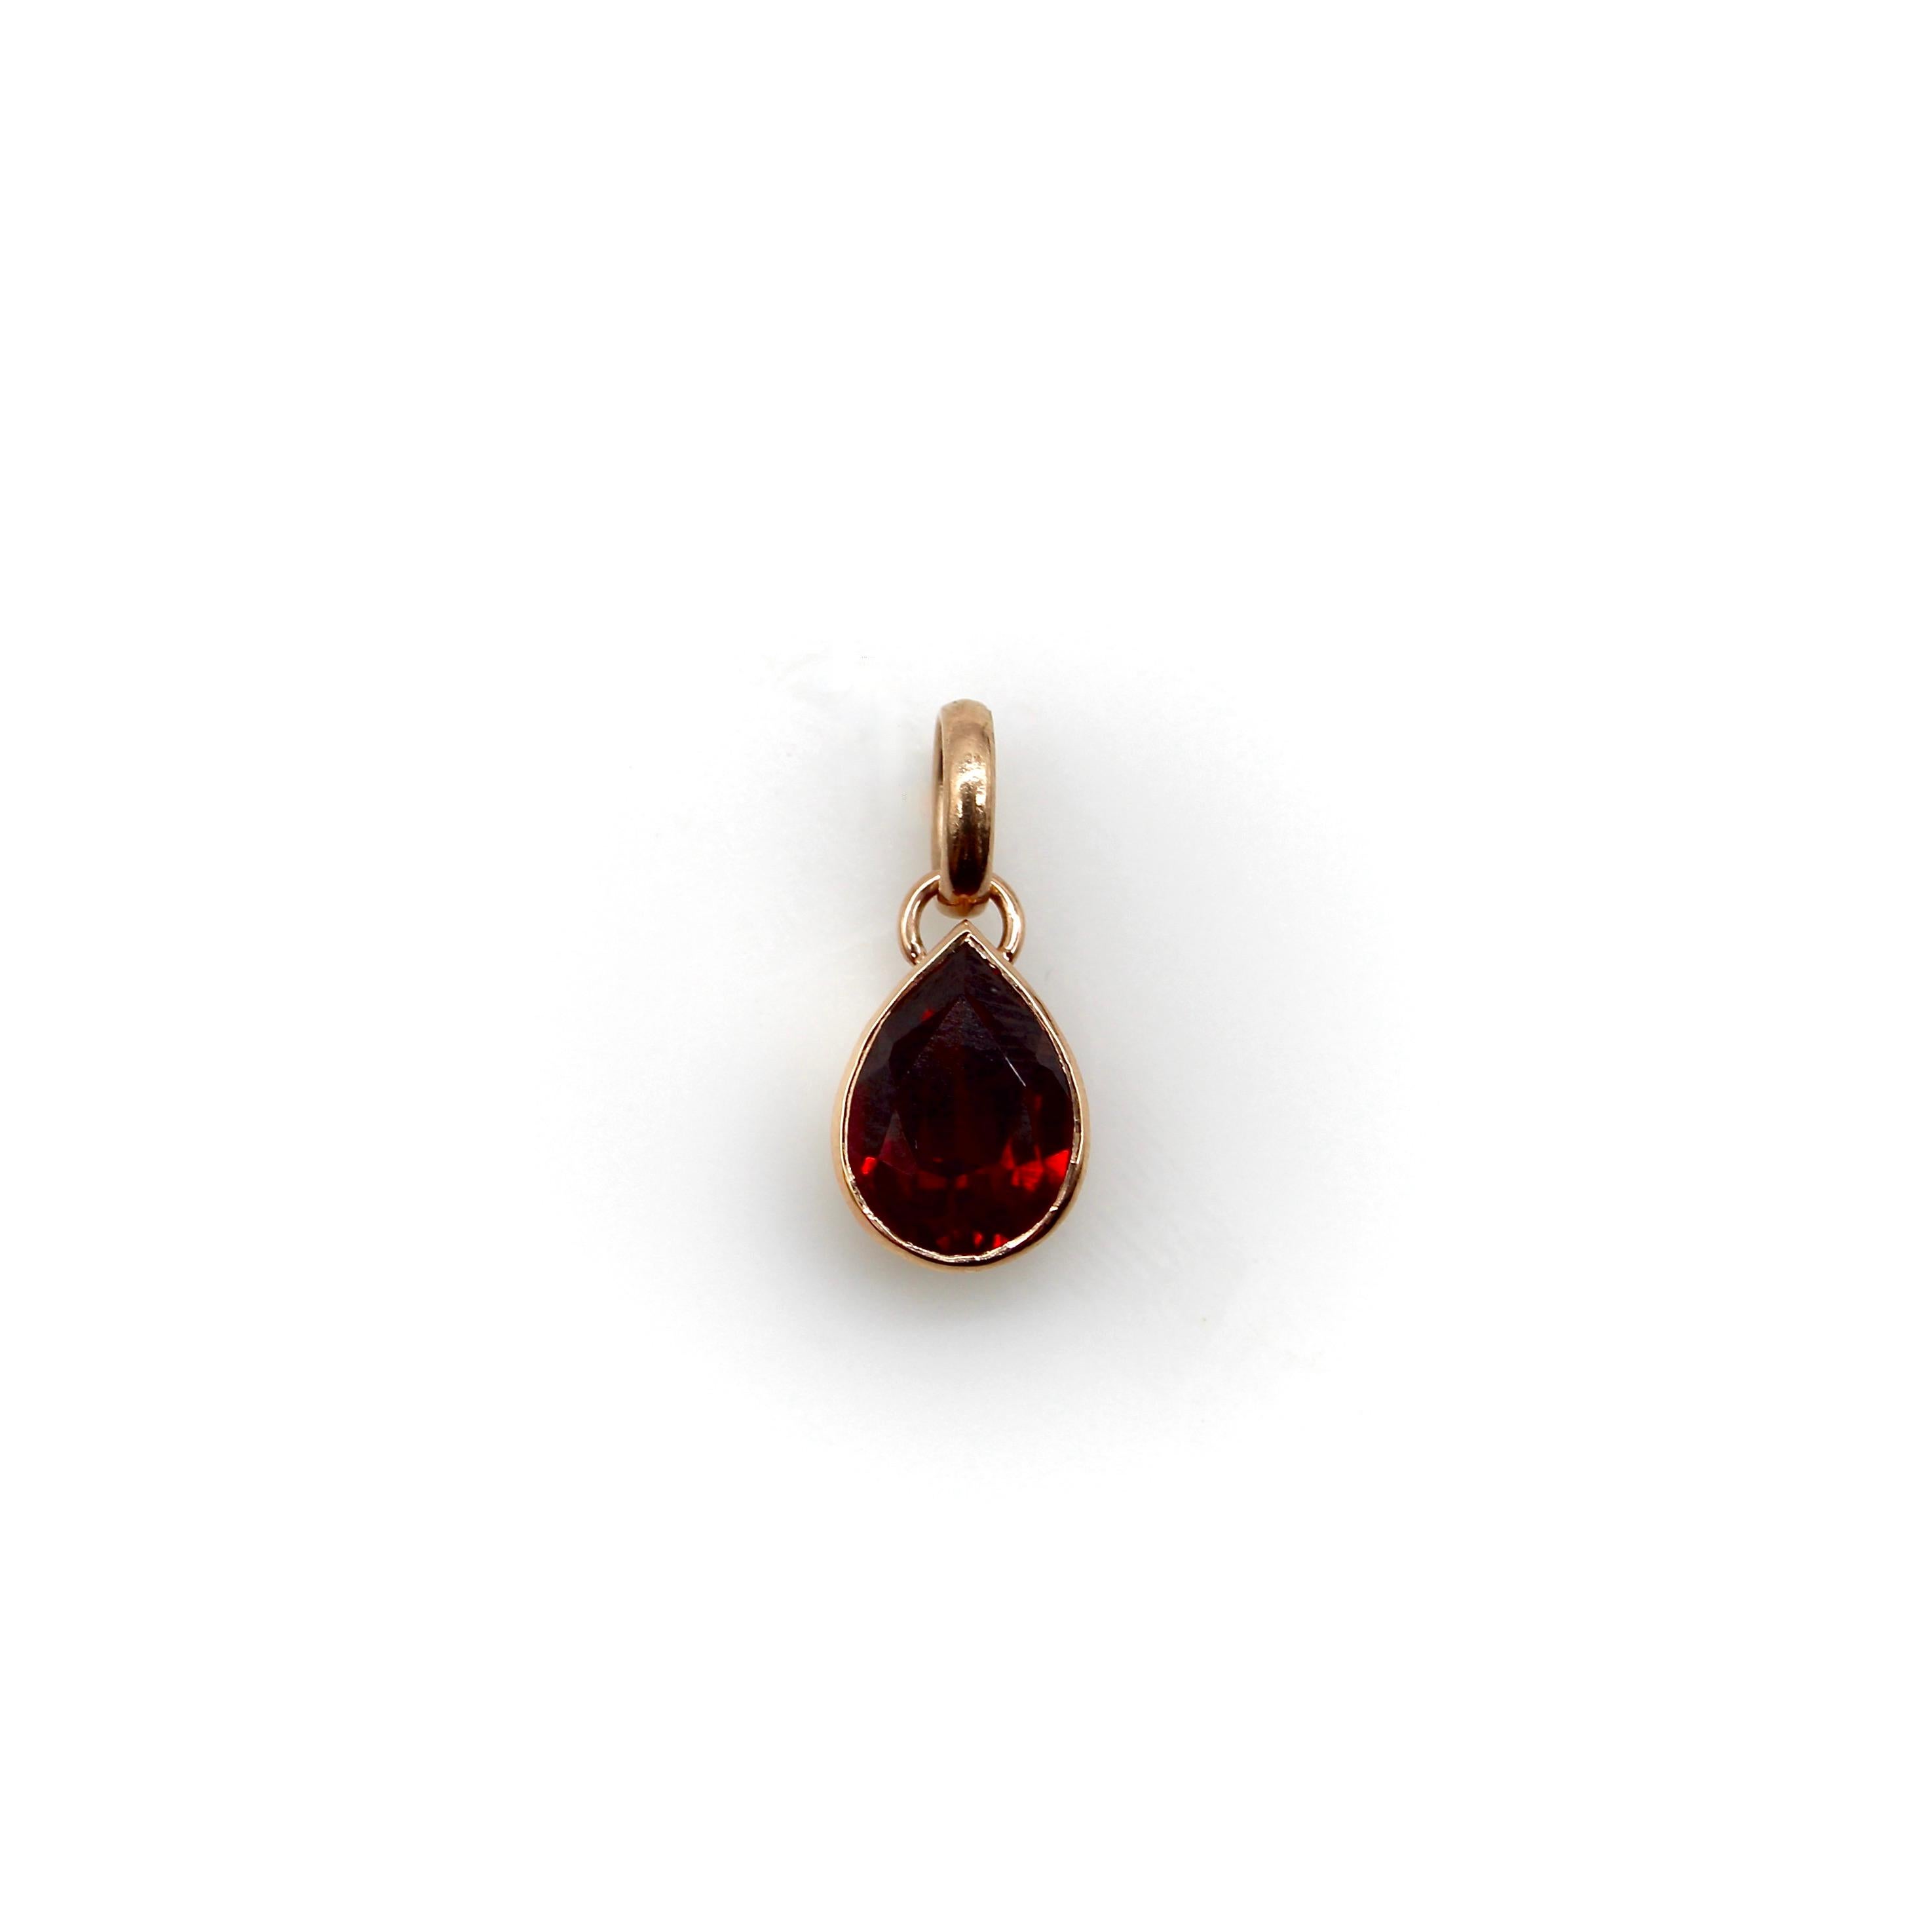 This beautiful pear-shaped garnet is bezel set in 14k rose gold. The vibrant red hues of the sparkling garnet are accentuated by the subtle pink tones of the rose gold, making this a lovely piece. The pendant has an oval bail, allowing the garnet to